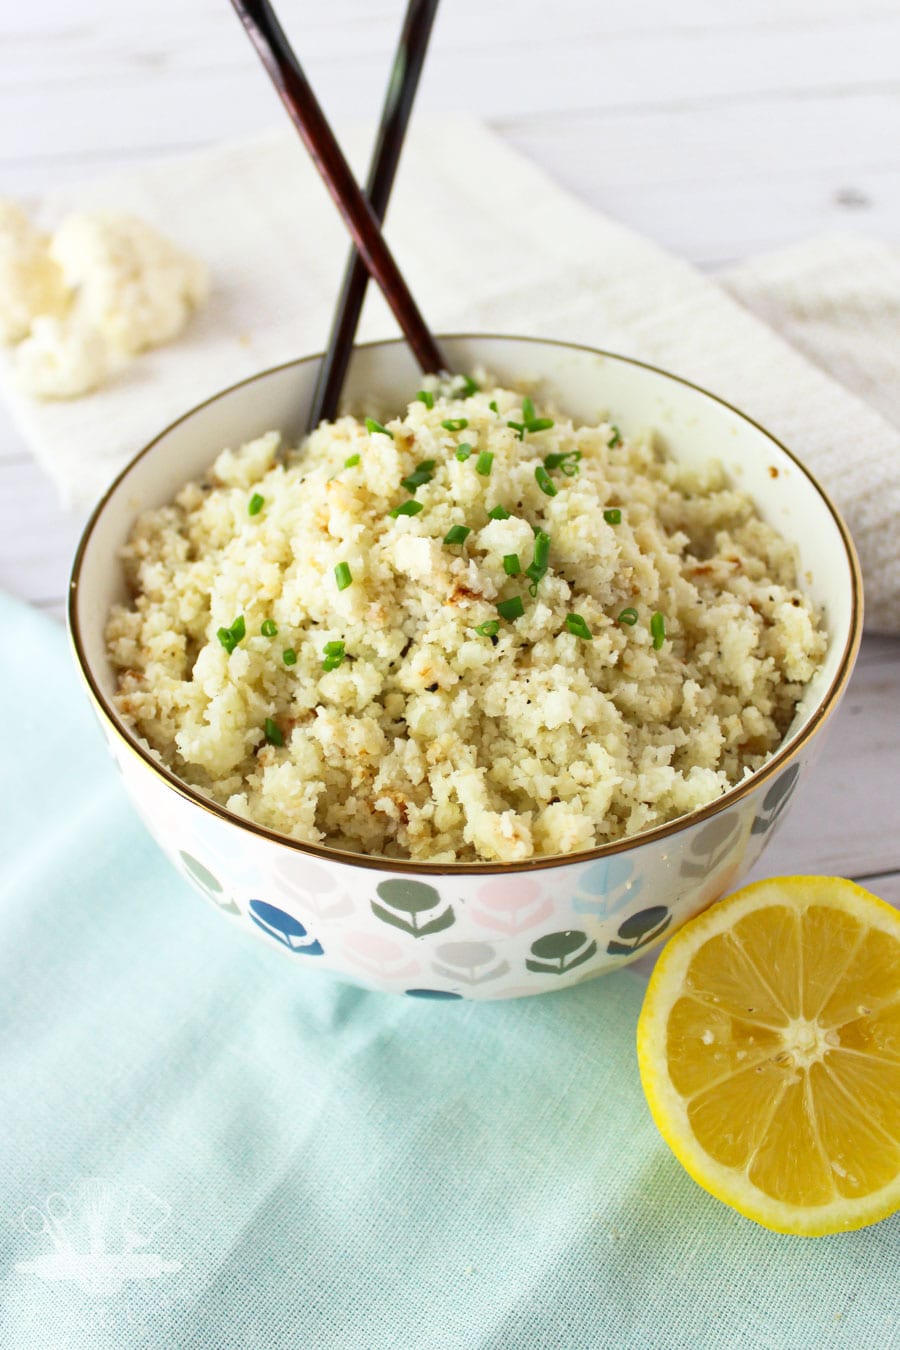 Learn how to make this delicious cauliflower rice to give your meals a low-carb spin or sneak some veggies into your kid's diet. Seriously, they won't know the difference!